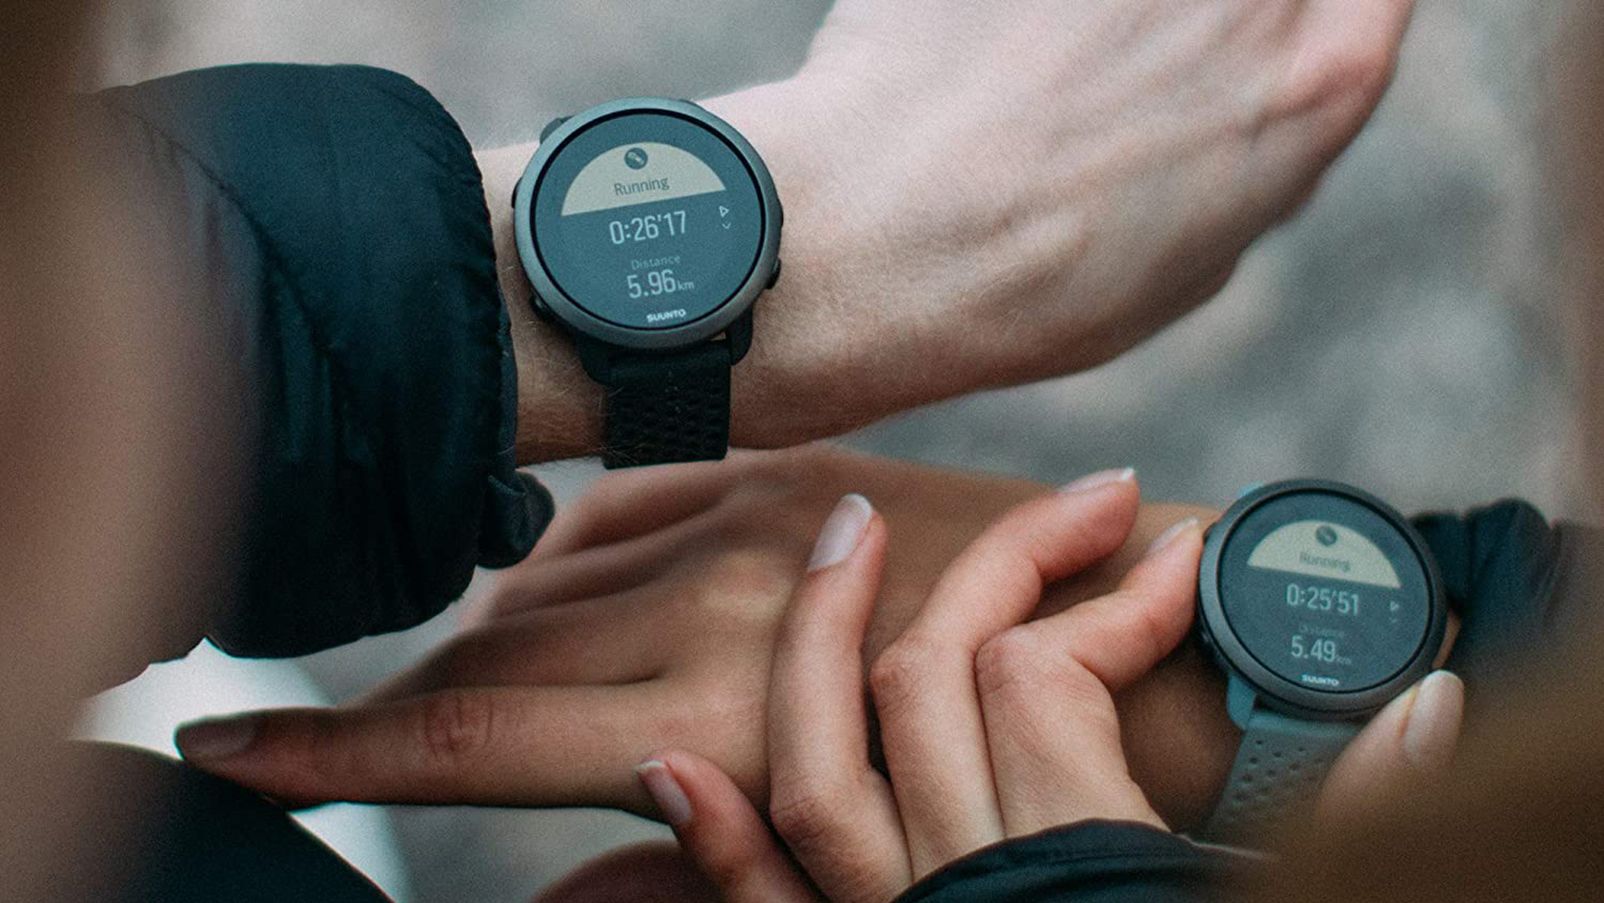 Garmin's new Forerunner 45 and 45S are for newbie runners